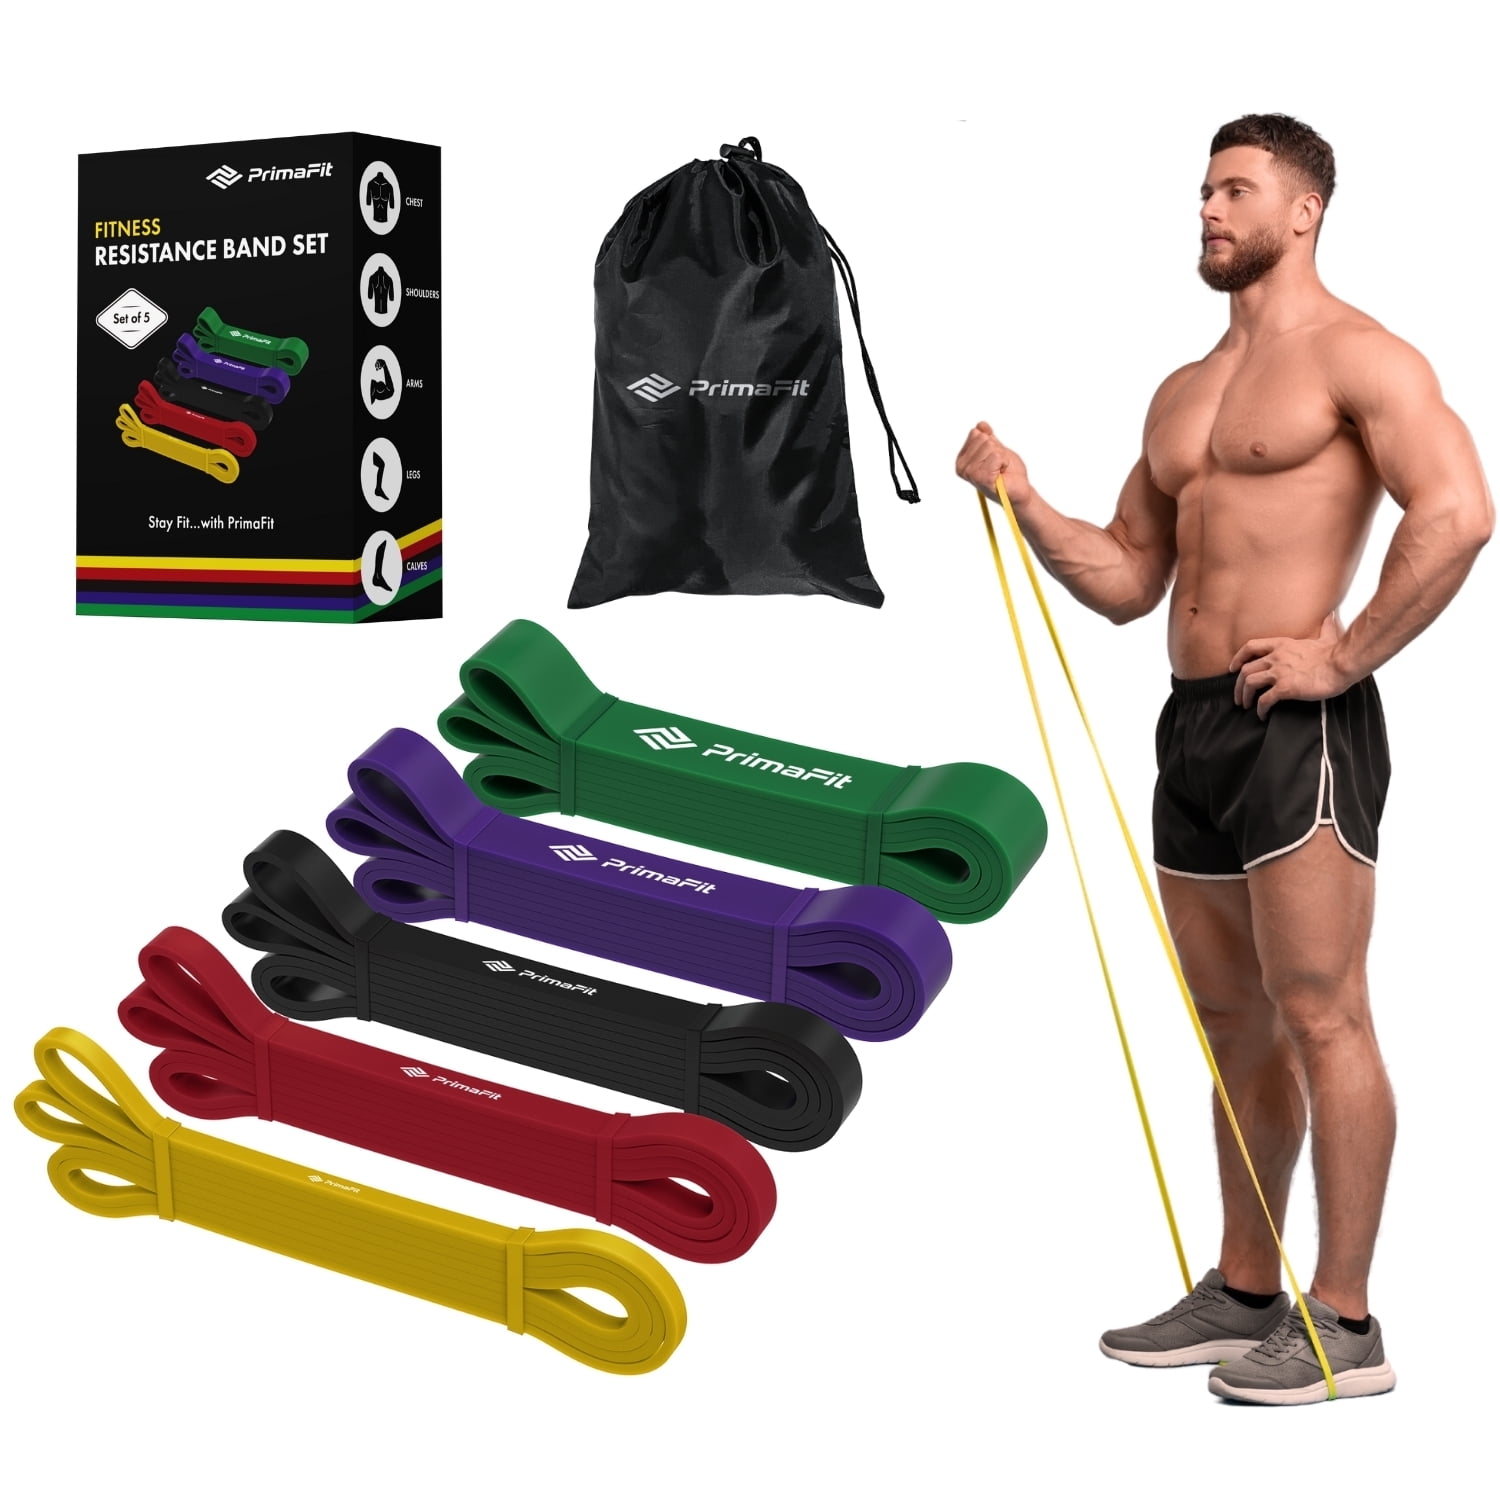  MummyStrength Resistance Bands for Men and Women. The Best  Stretch Band for Pull Up Exercise and Powerlifting. Works with Any Pull Up  Bar or Station. Single Band. Workout Guide Included (Black) 